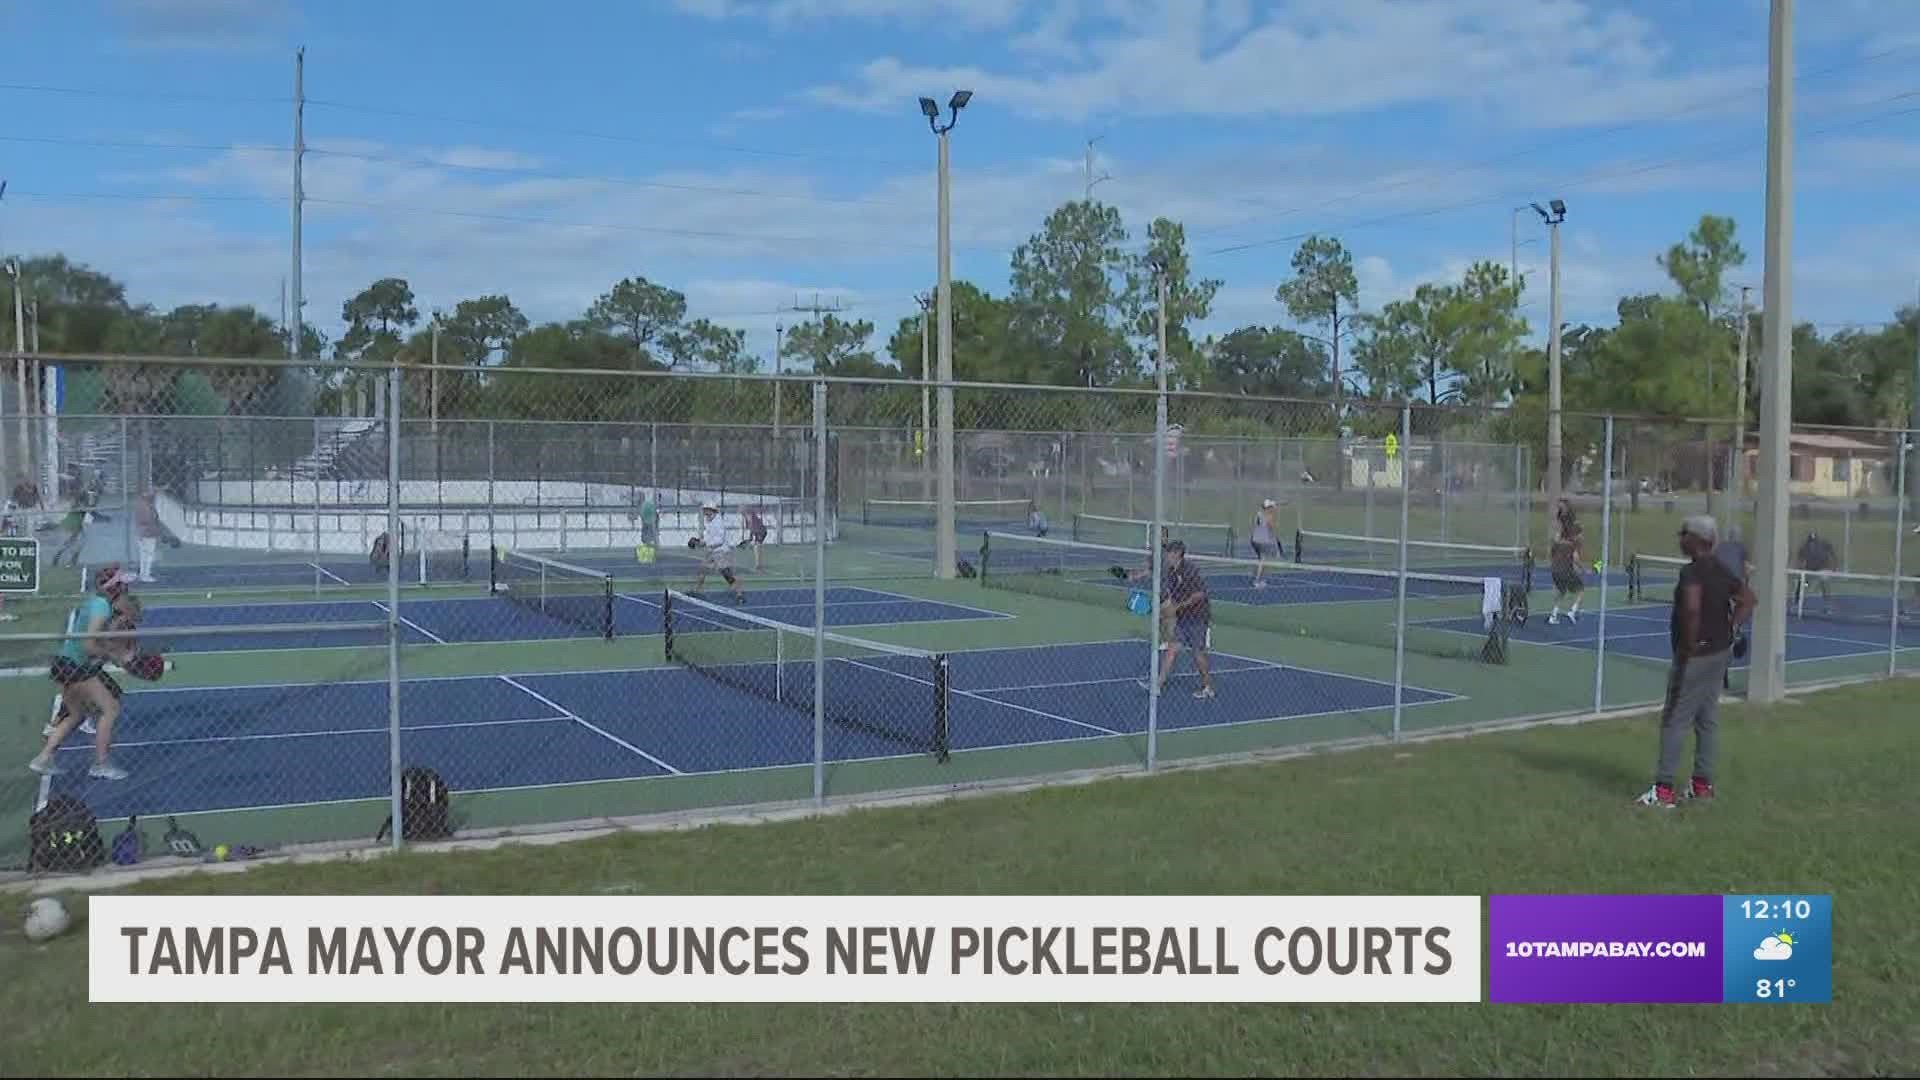 Before 2021, Tampa had only nine pickleball courts which over the years has grown substantially.